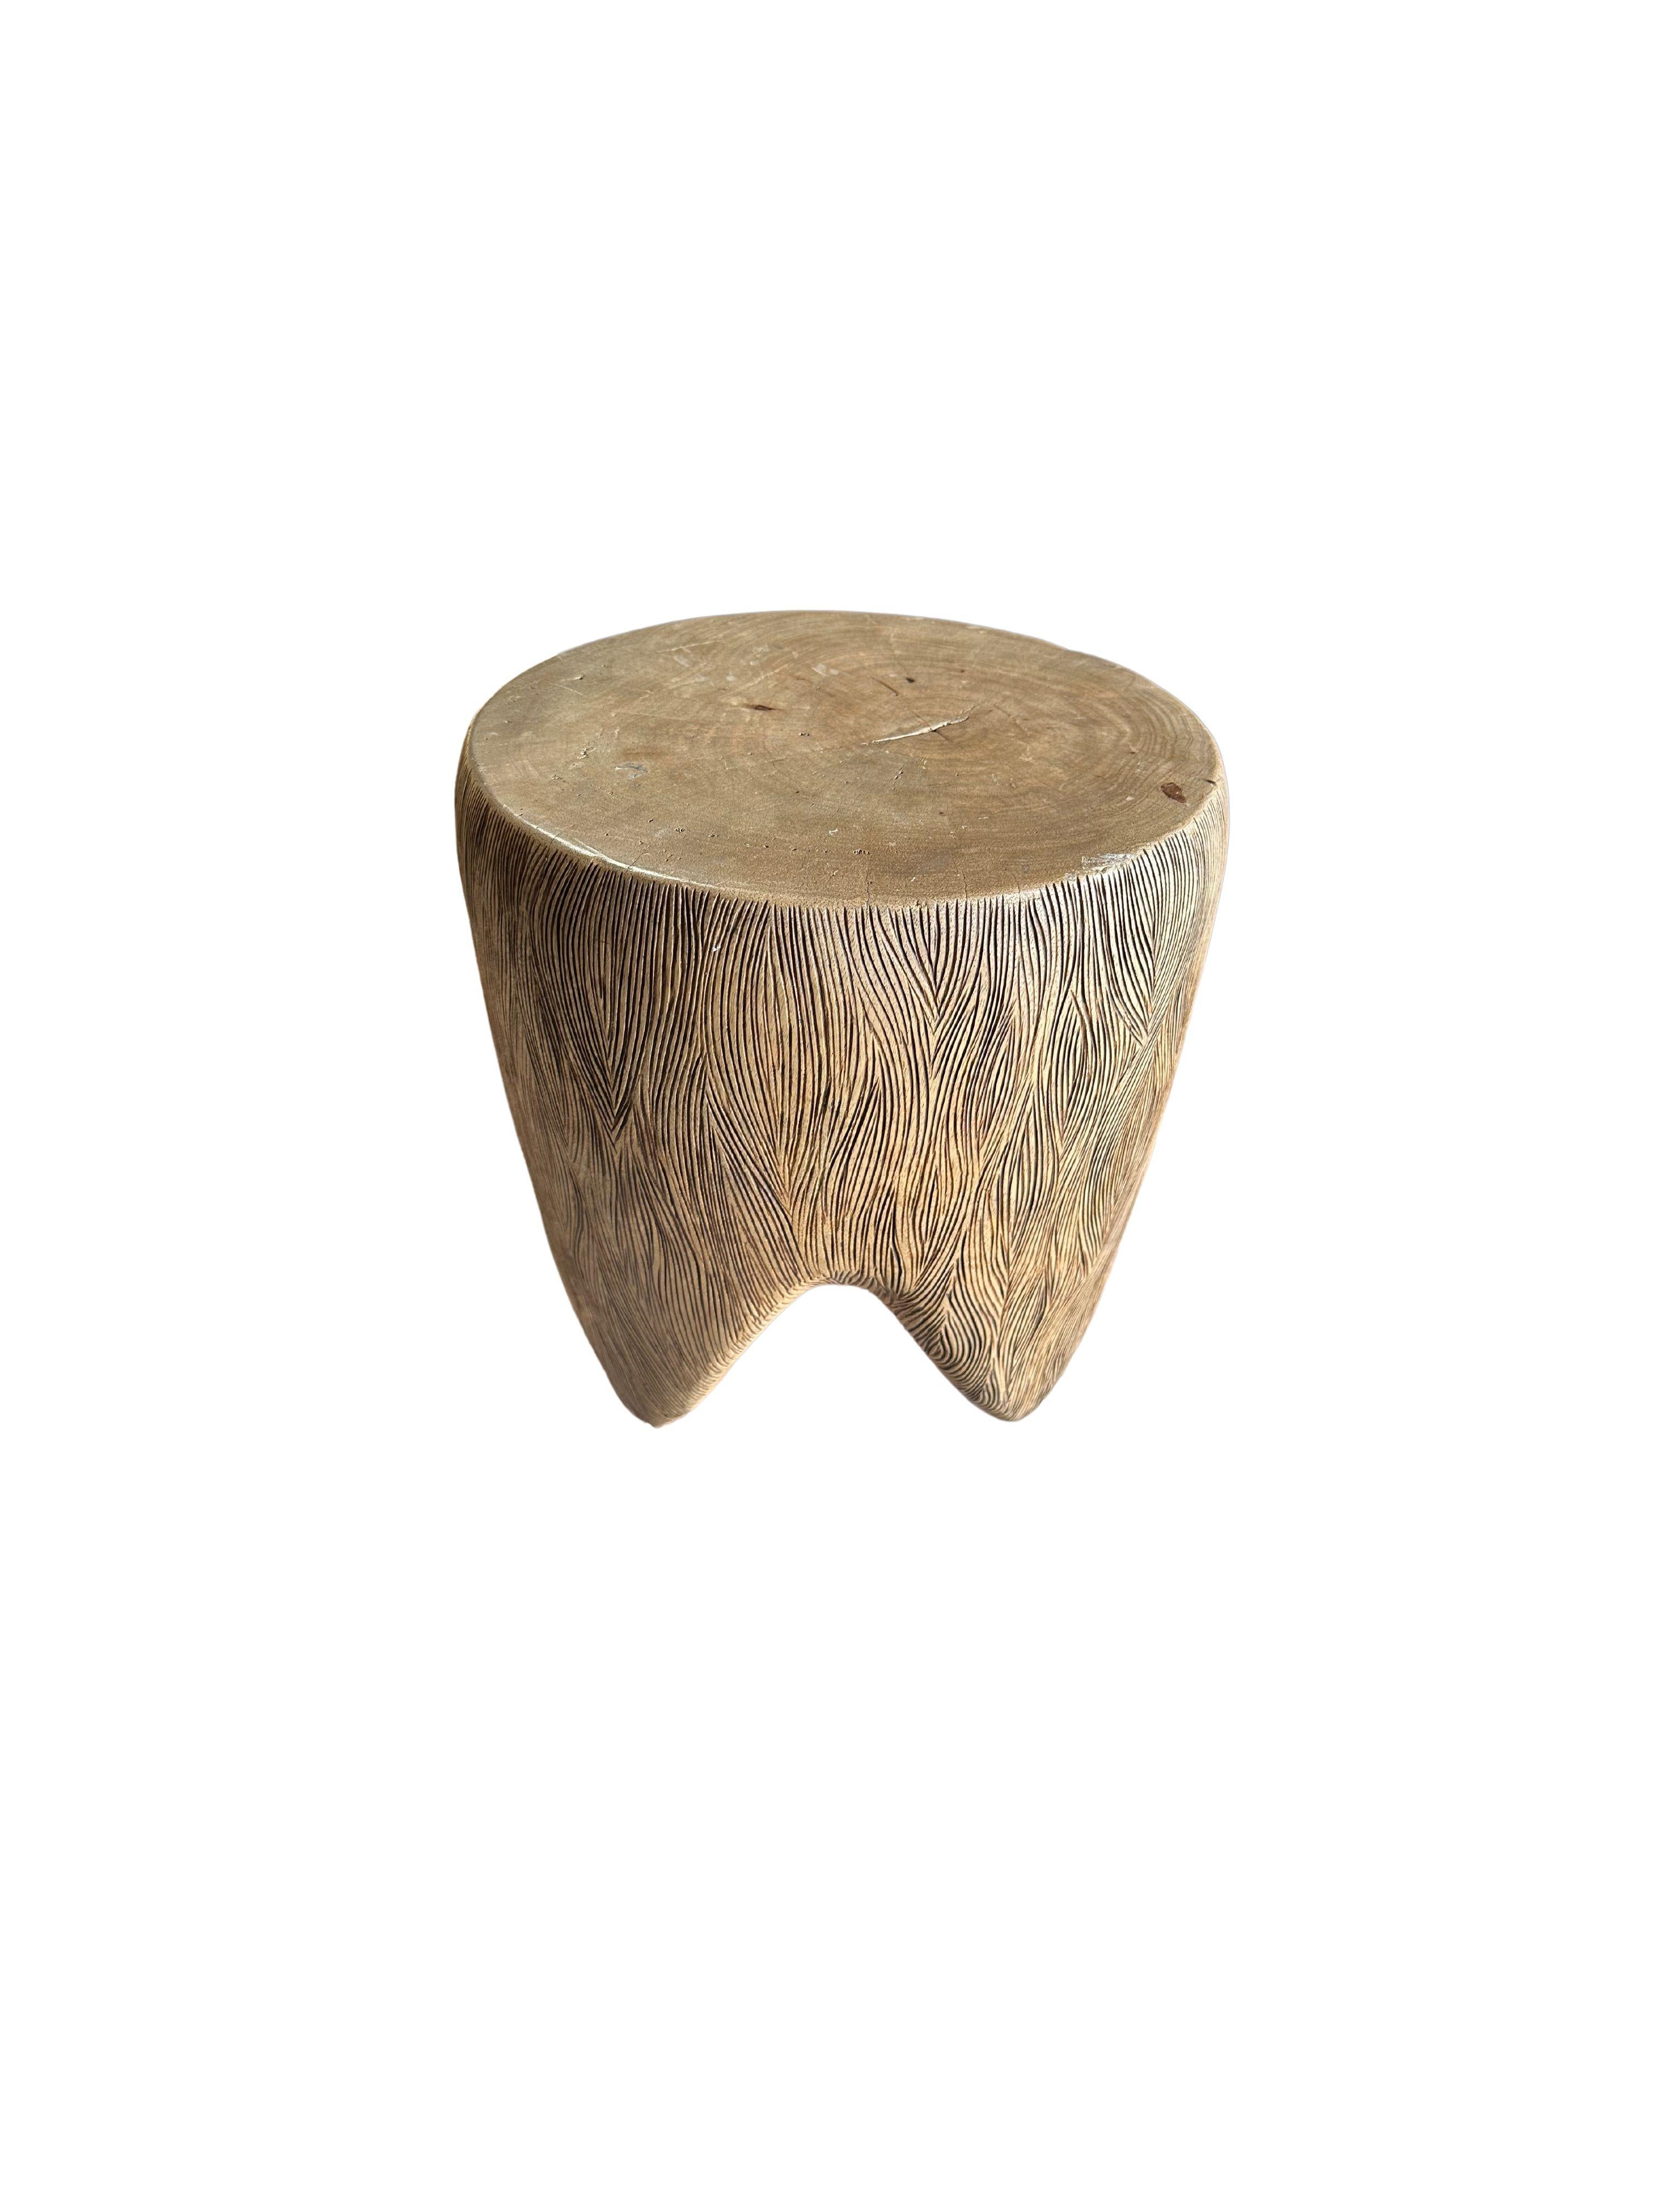 Sculptural Mango Wood Side Table, Hand-Crafted Modern Organic In Good Condition For Sale In Jimbaran, Bali